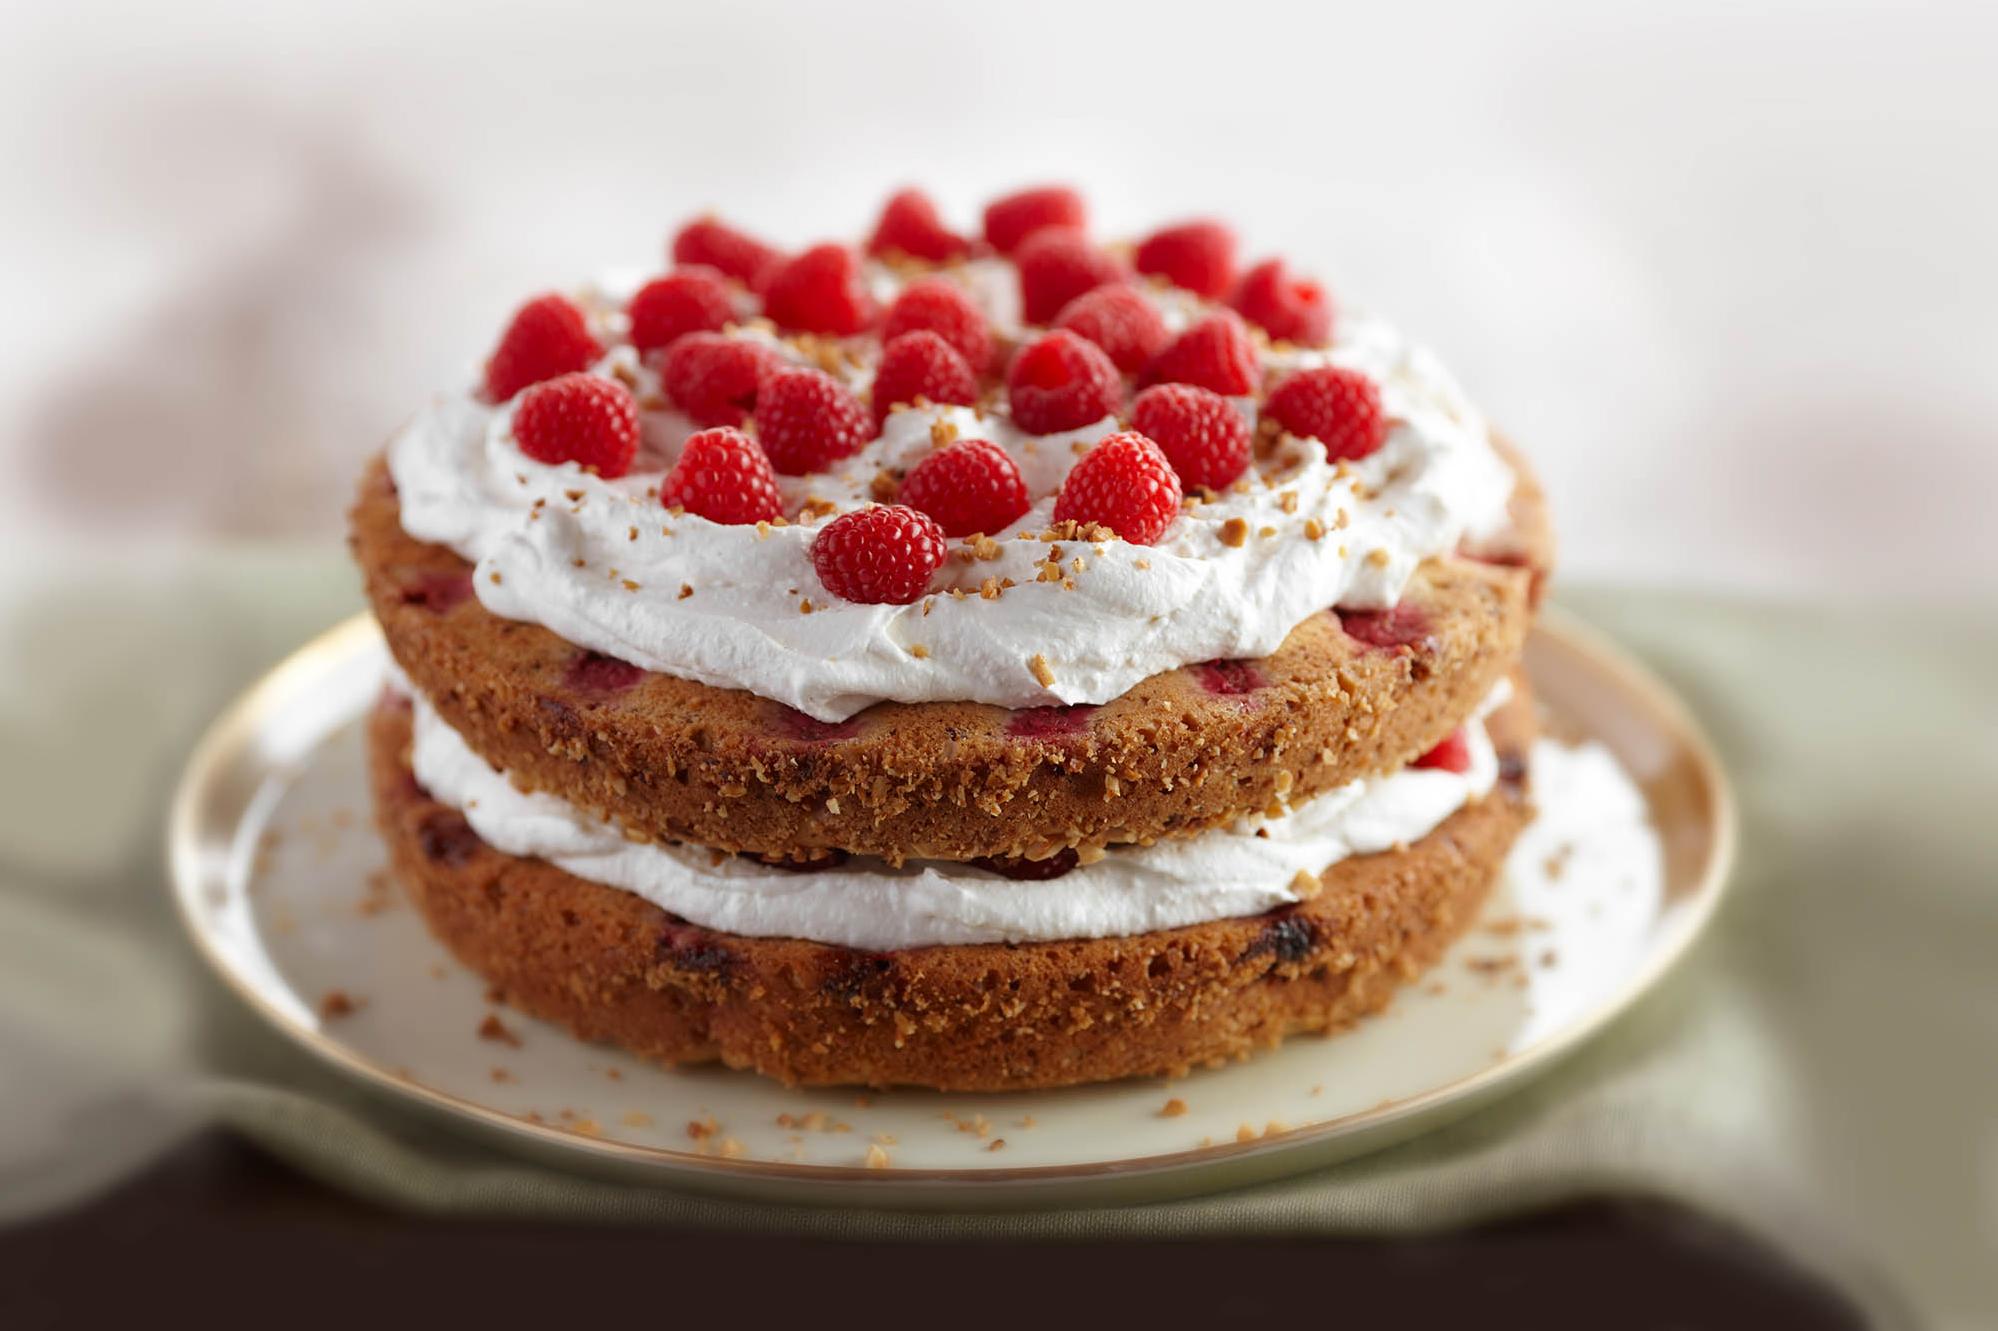  This delicious cake is perfect for breakfast, dessert, or anytime.